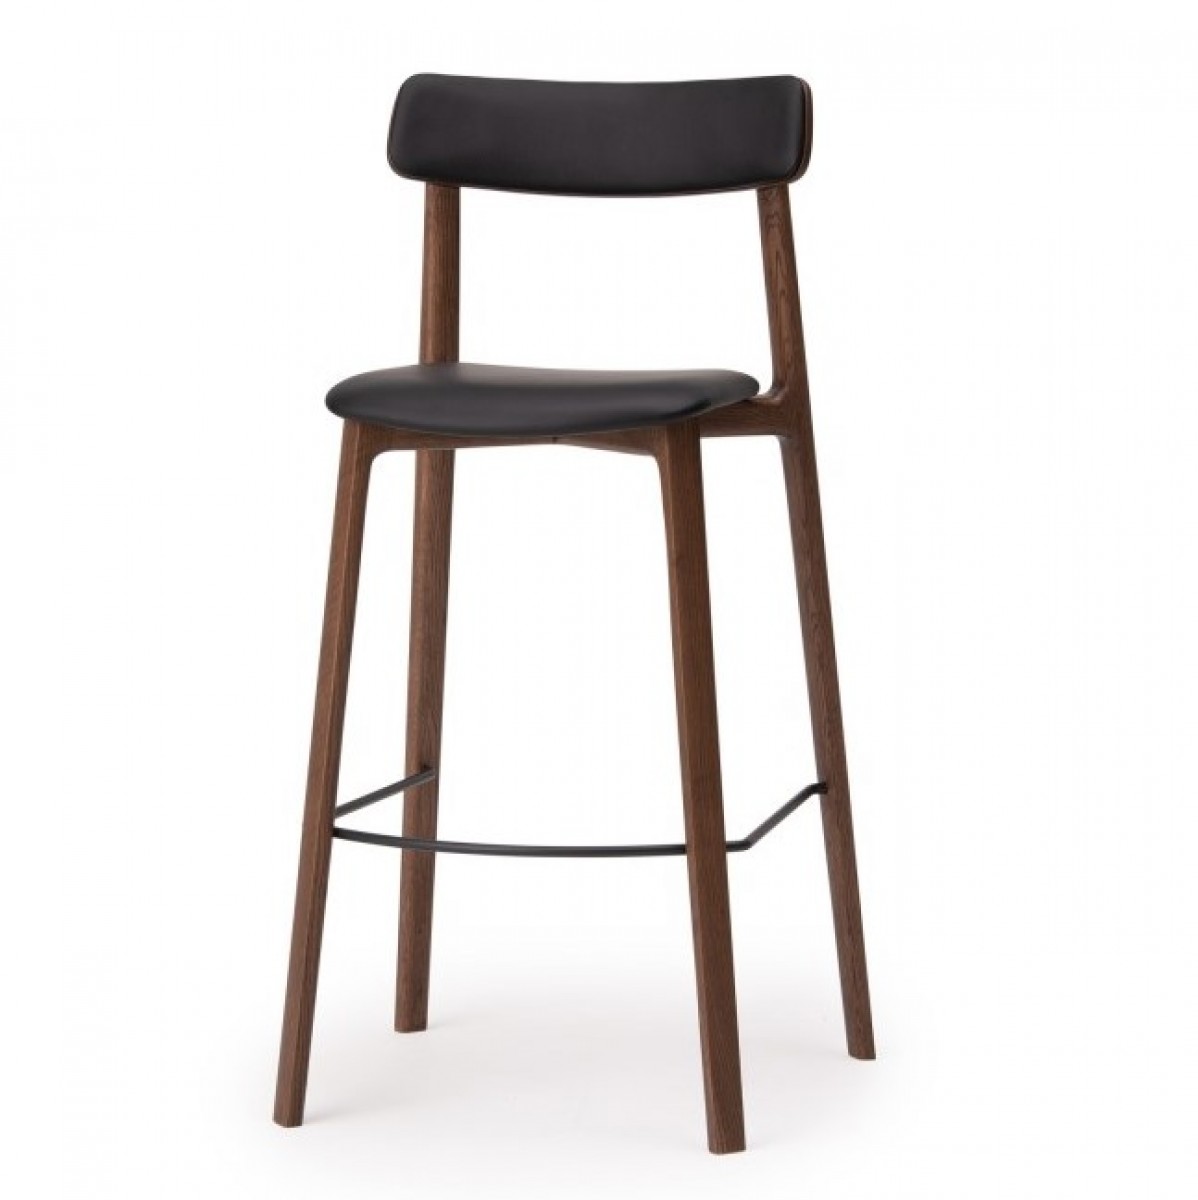 AATOS Dining Stacking High Chair UB (Upholstered Seat)